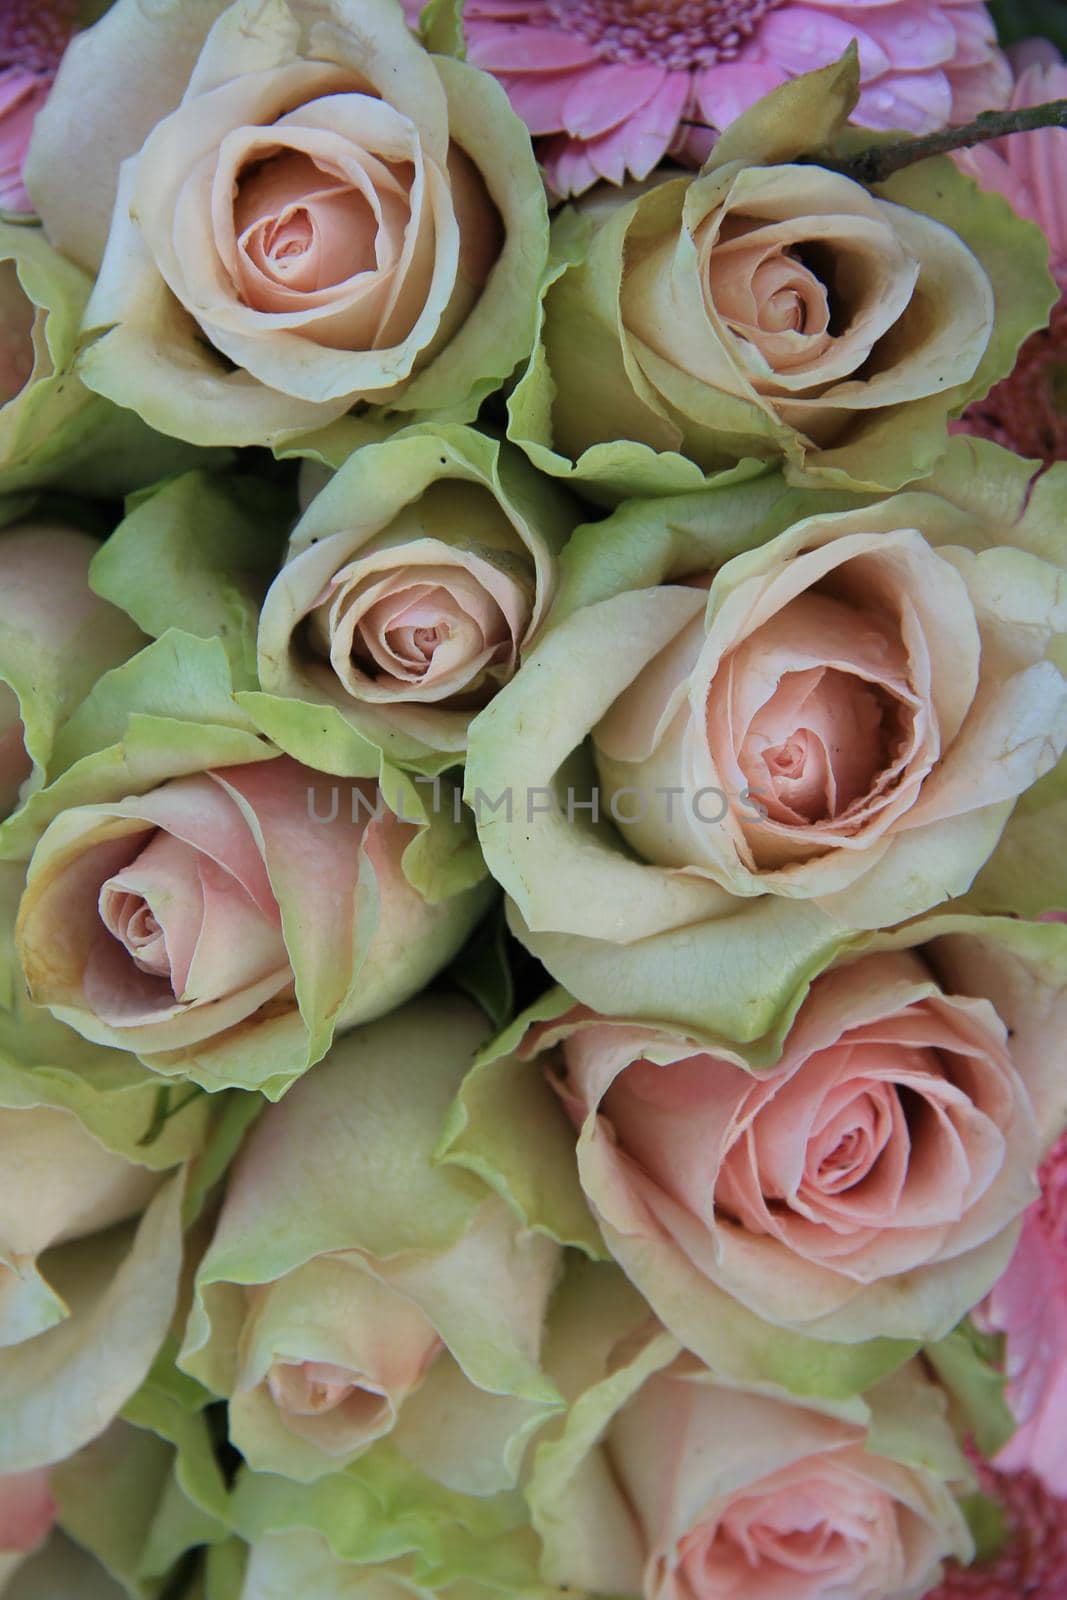 Pink roses in a mixed bridal bouquet